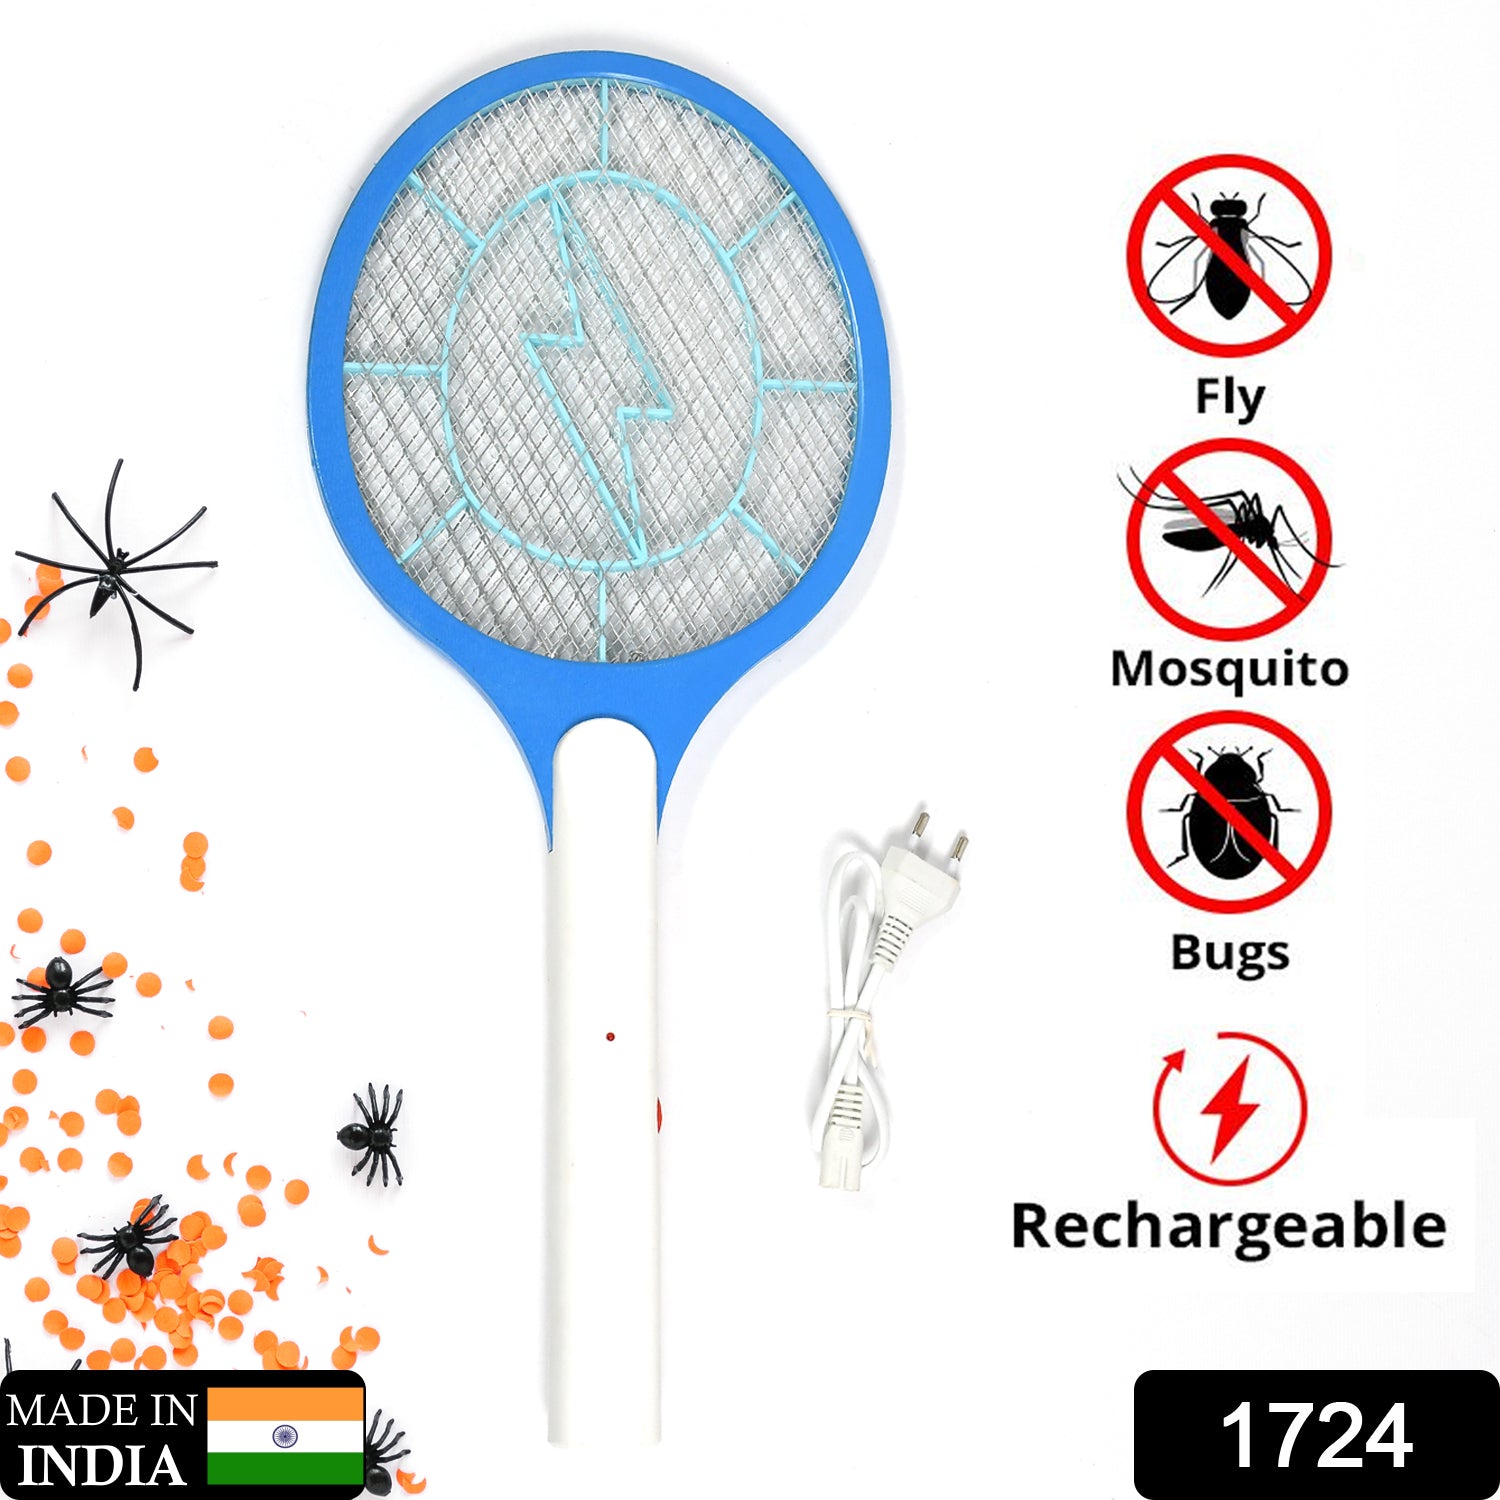 Mosquito Killer Racket Rechargeable Handheld Electric Fly Swatter Mosquito Killer Racket Bat, Electric Insect Killer (Quality Assured) (with cable)